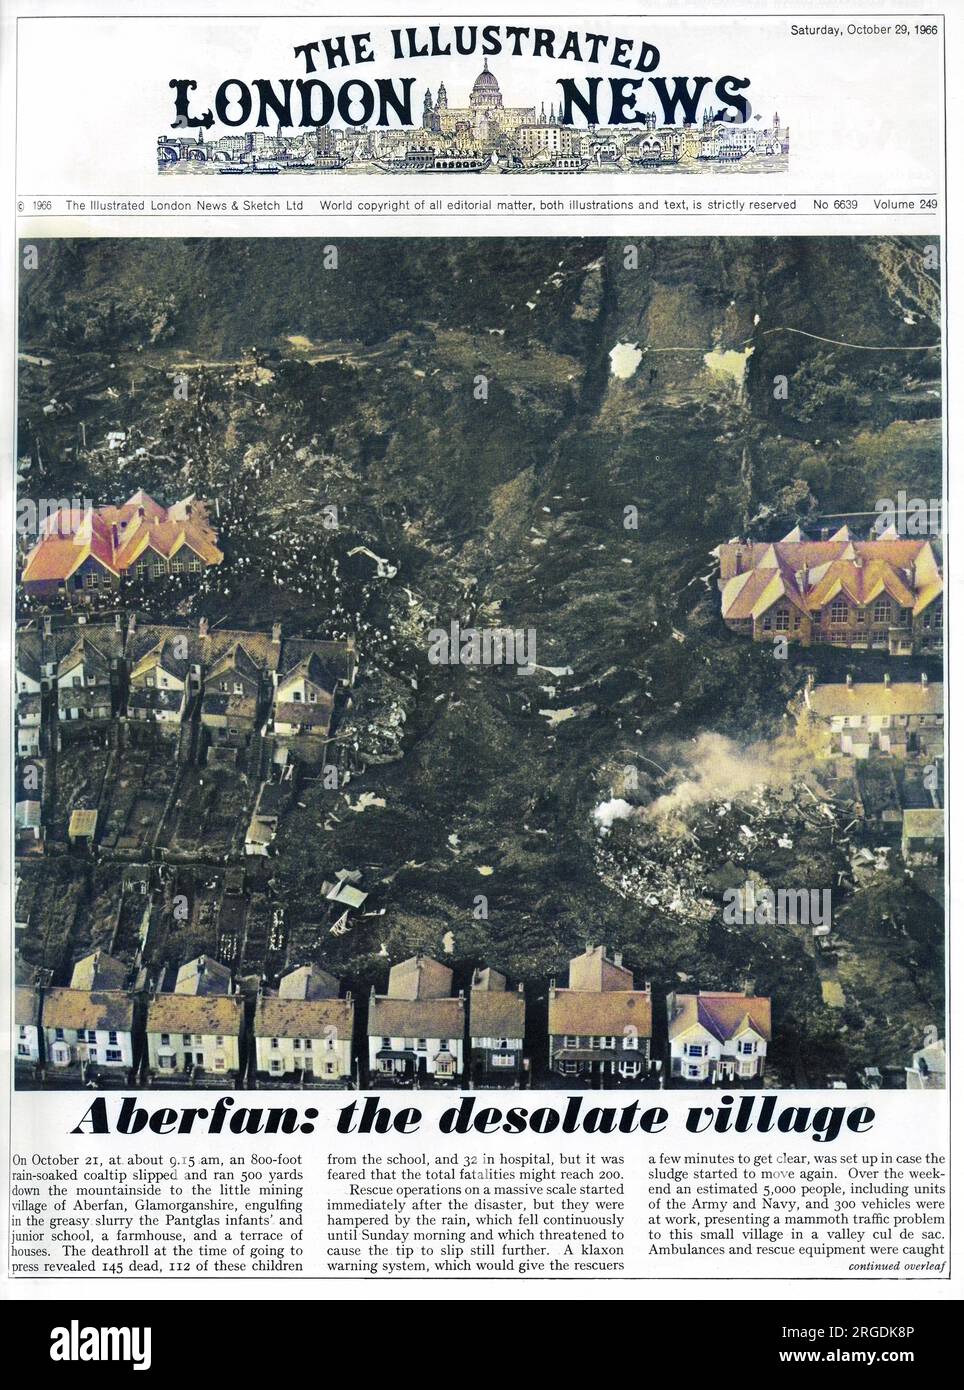 The front page of The Illustrated London News, reporting on the Aberfan disaster. An aerial view of the path of destruction left by the rain-soaked coal tip that slipped 500 yards down the mountainside into the mining village of Aberfan, Glamorgan, South Wales. The Pantglas infants and junior school, a farmhouse and a terrace of houses were engulfed in the slurry. Stock Photo